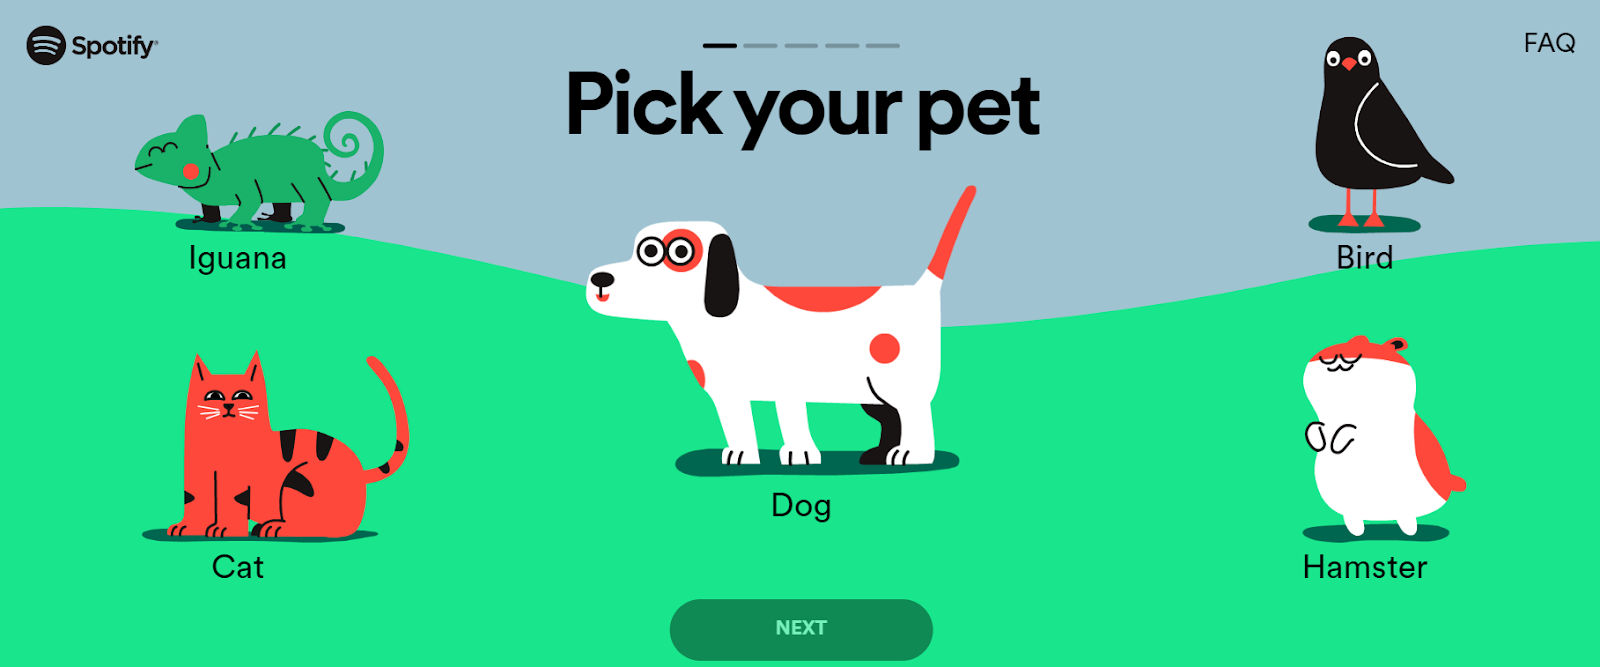 Home page of Spotify pets 